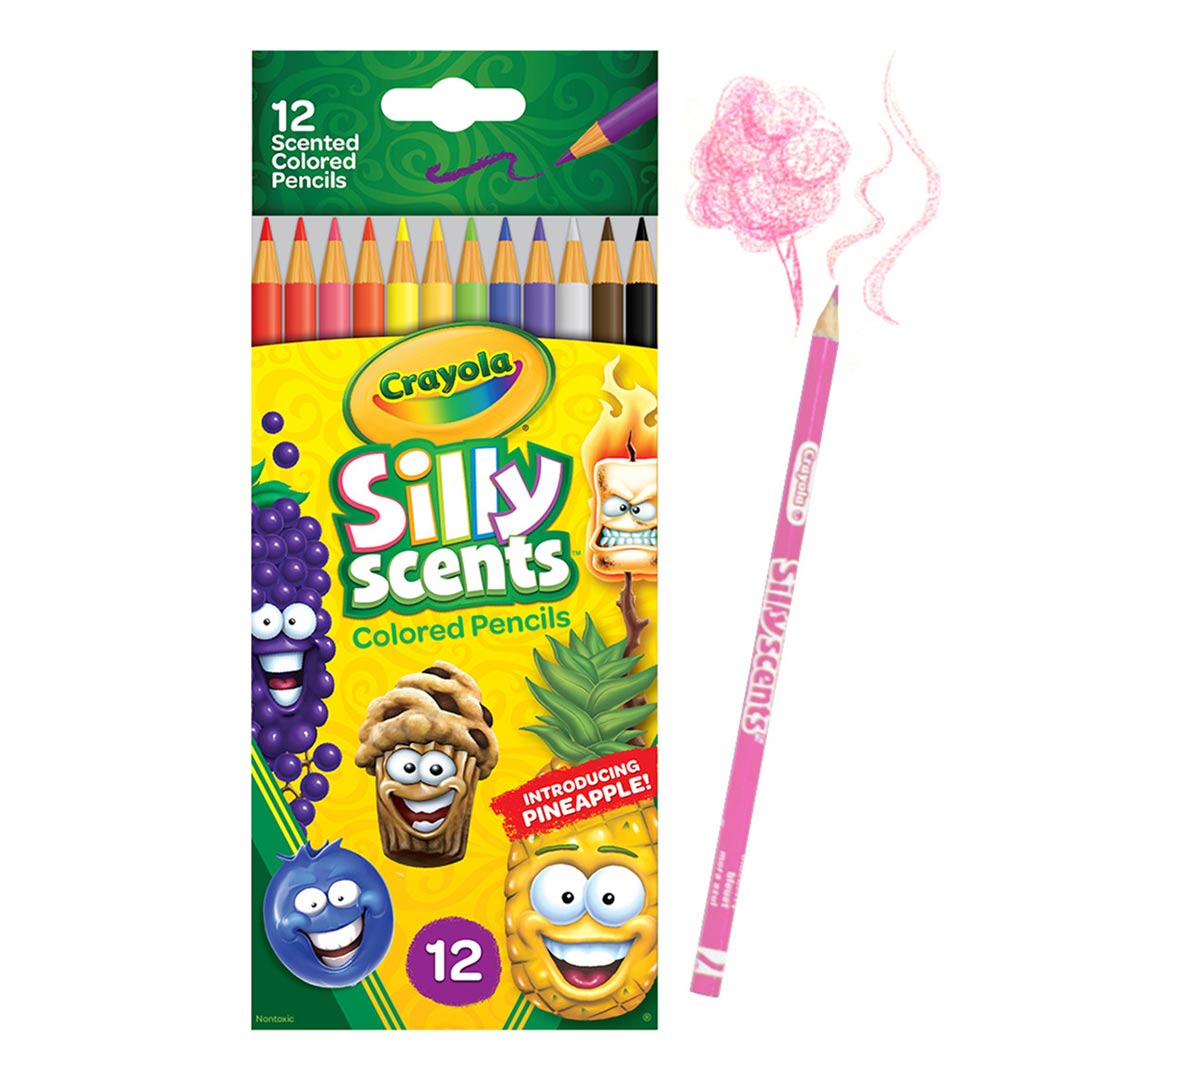 https://shop.crayola.com/on/demandware.static/-/Sites-crayola-storefront/default/dw606e5580/images/68-2112-0-200_Silly-Scents_Colored-Pencils_12ct_PDP_MAIN.jpg